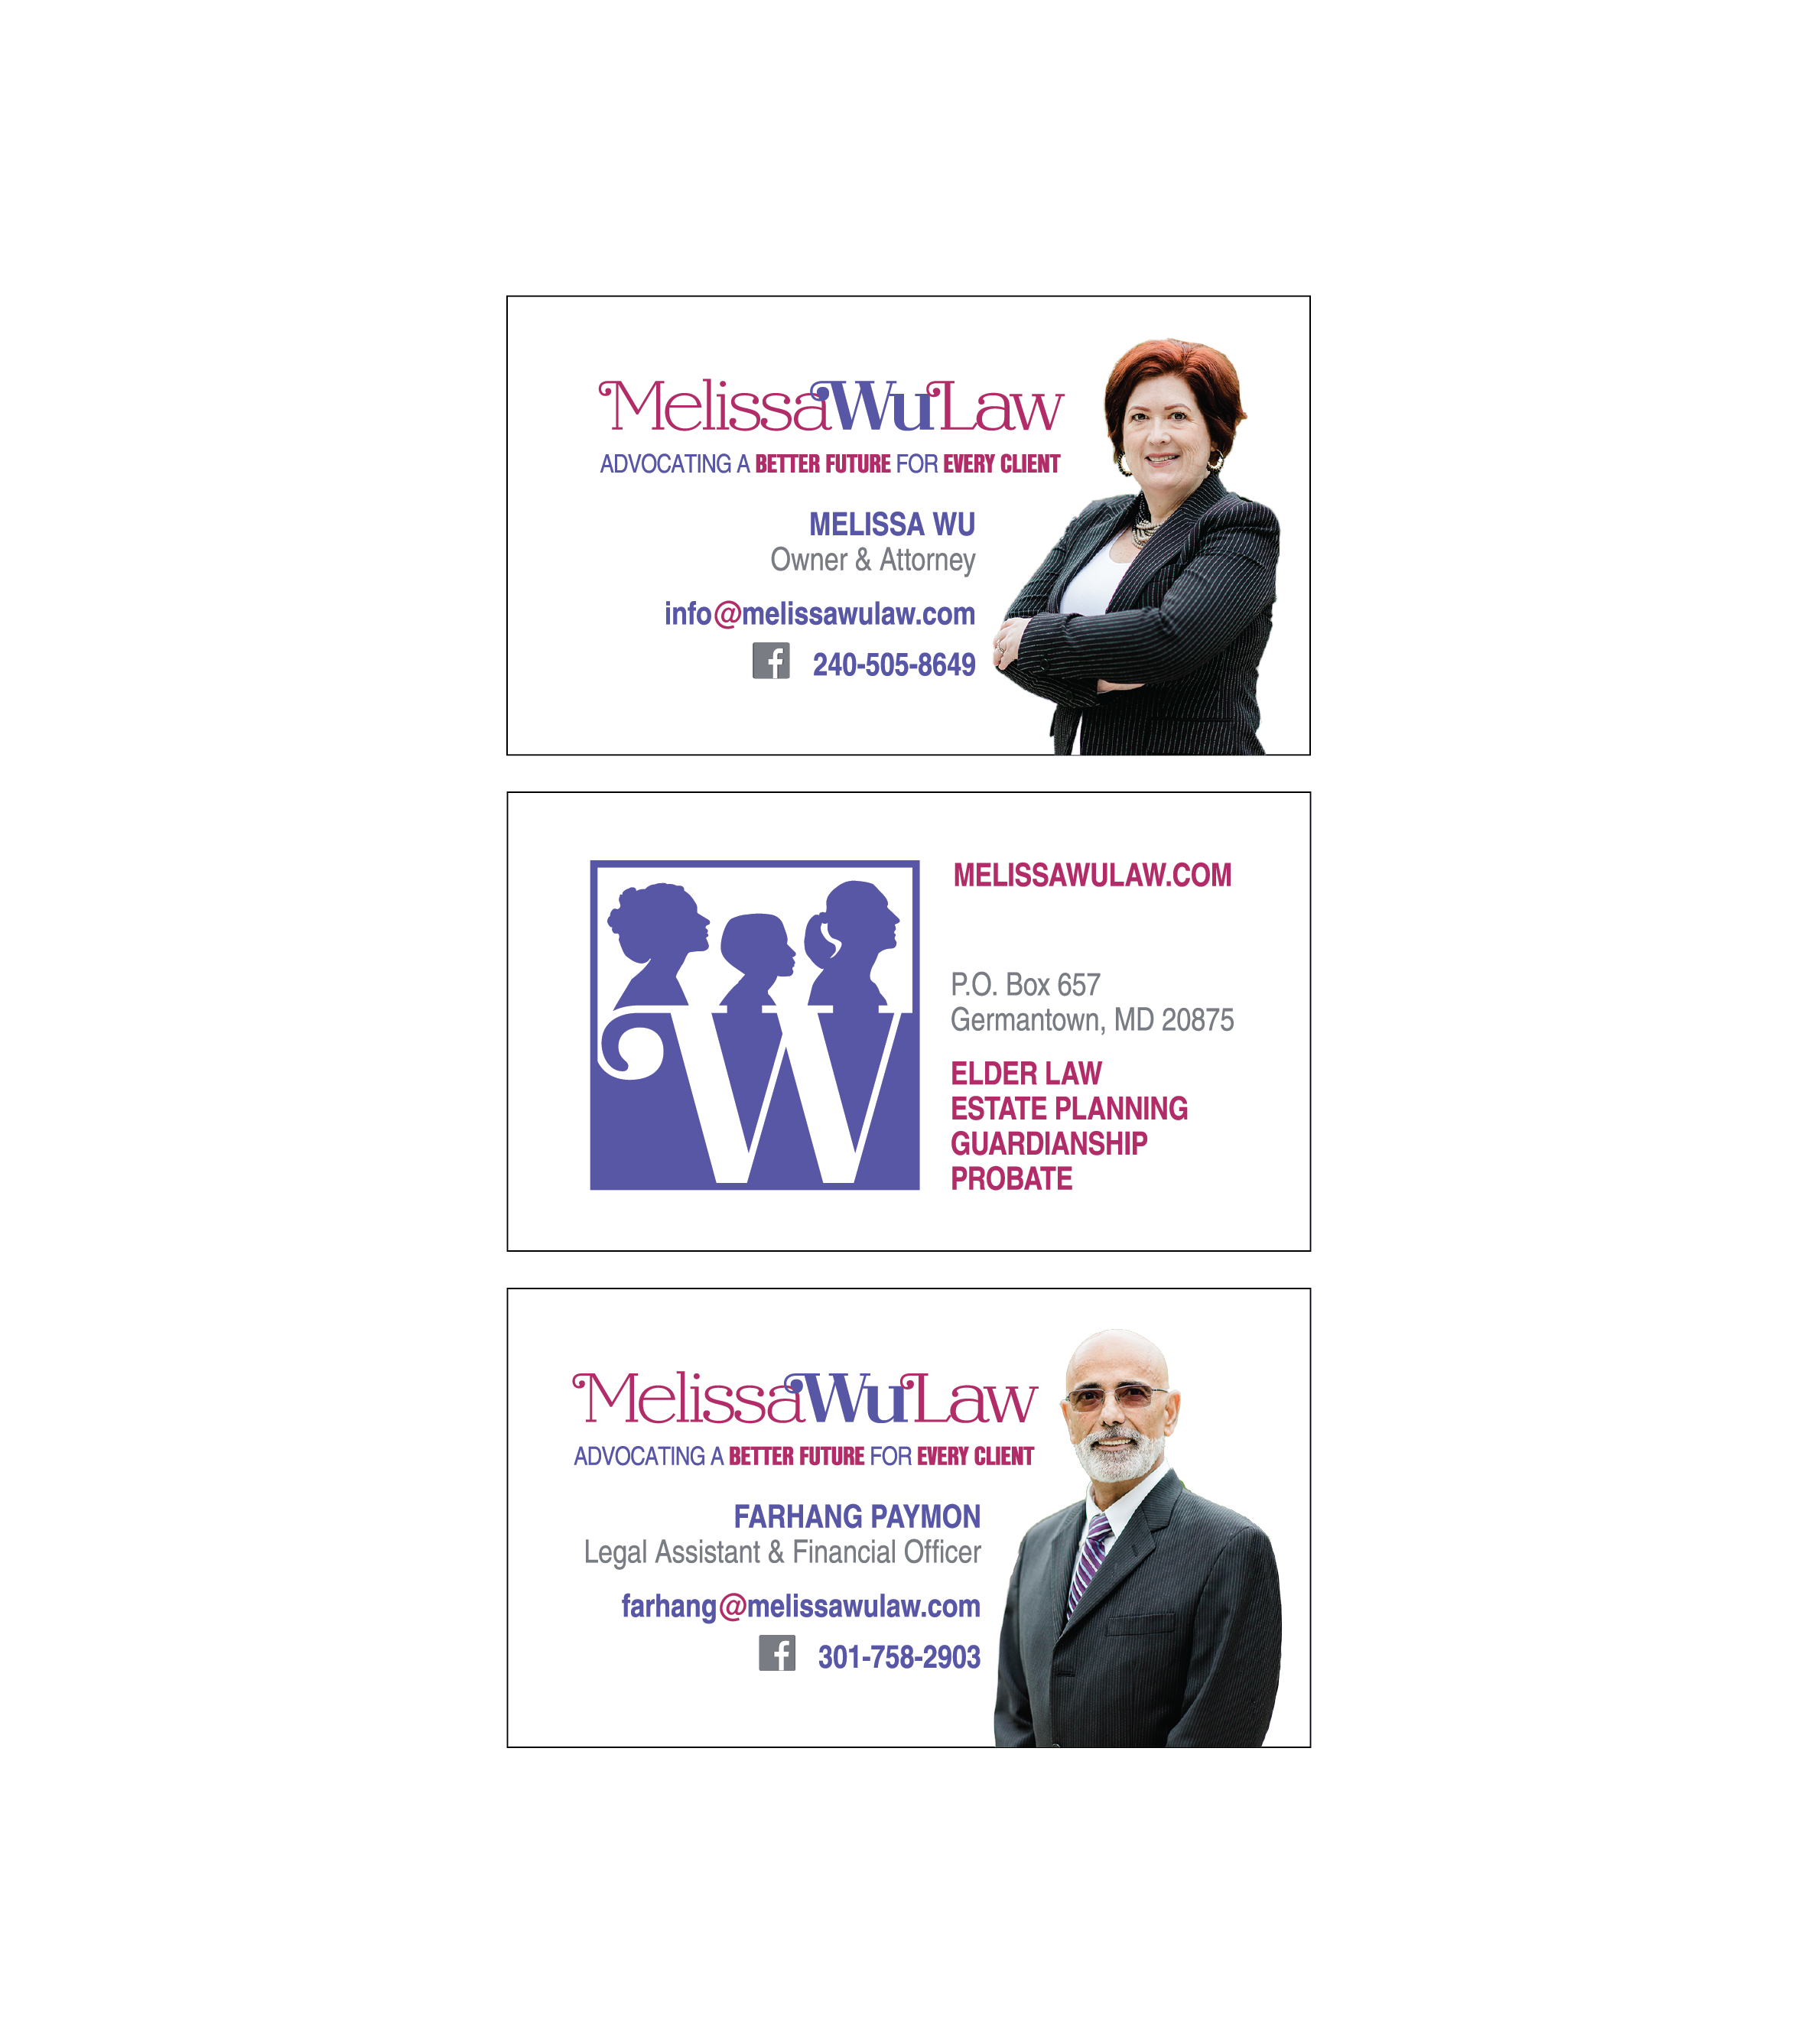 Melissa Wu Law Business Cards